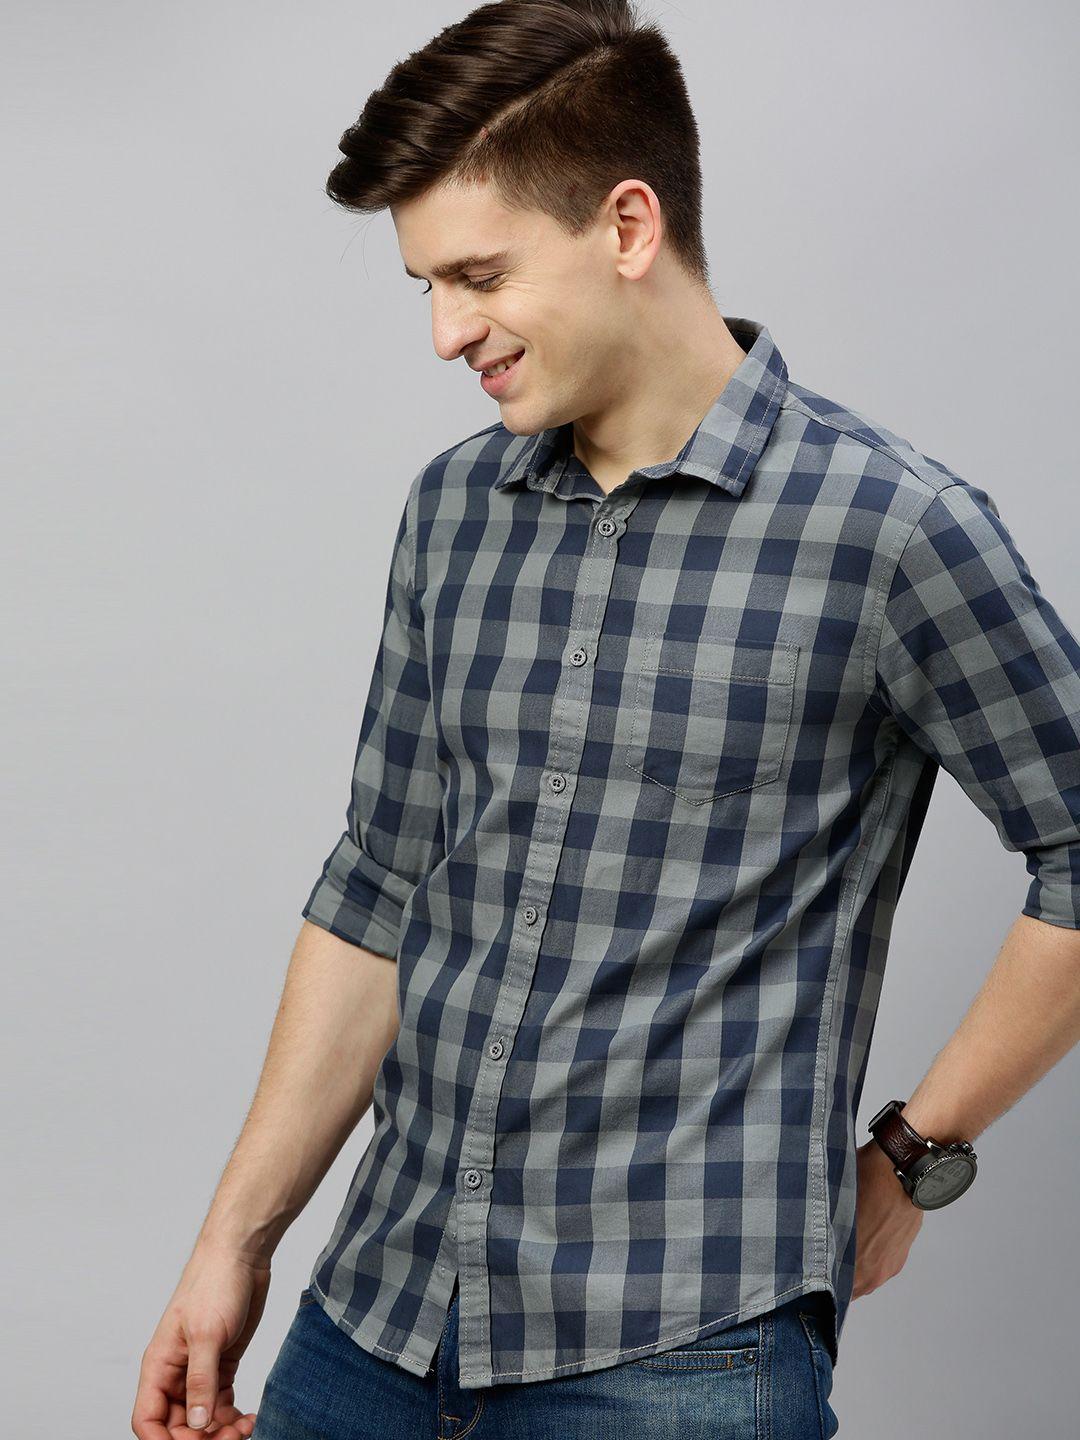 here&now men navy blue & grey slim fit checked casual shirt